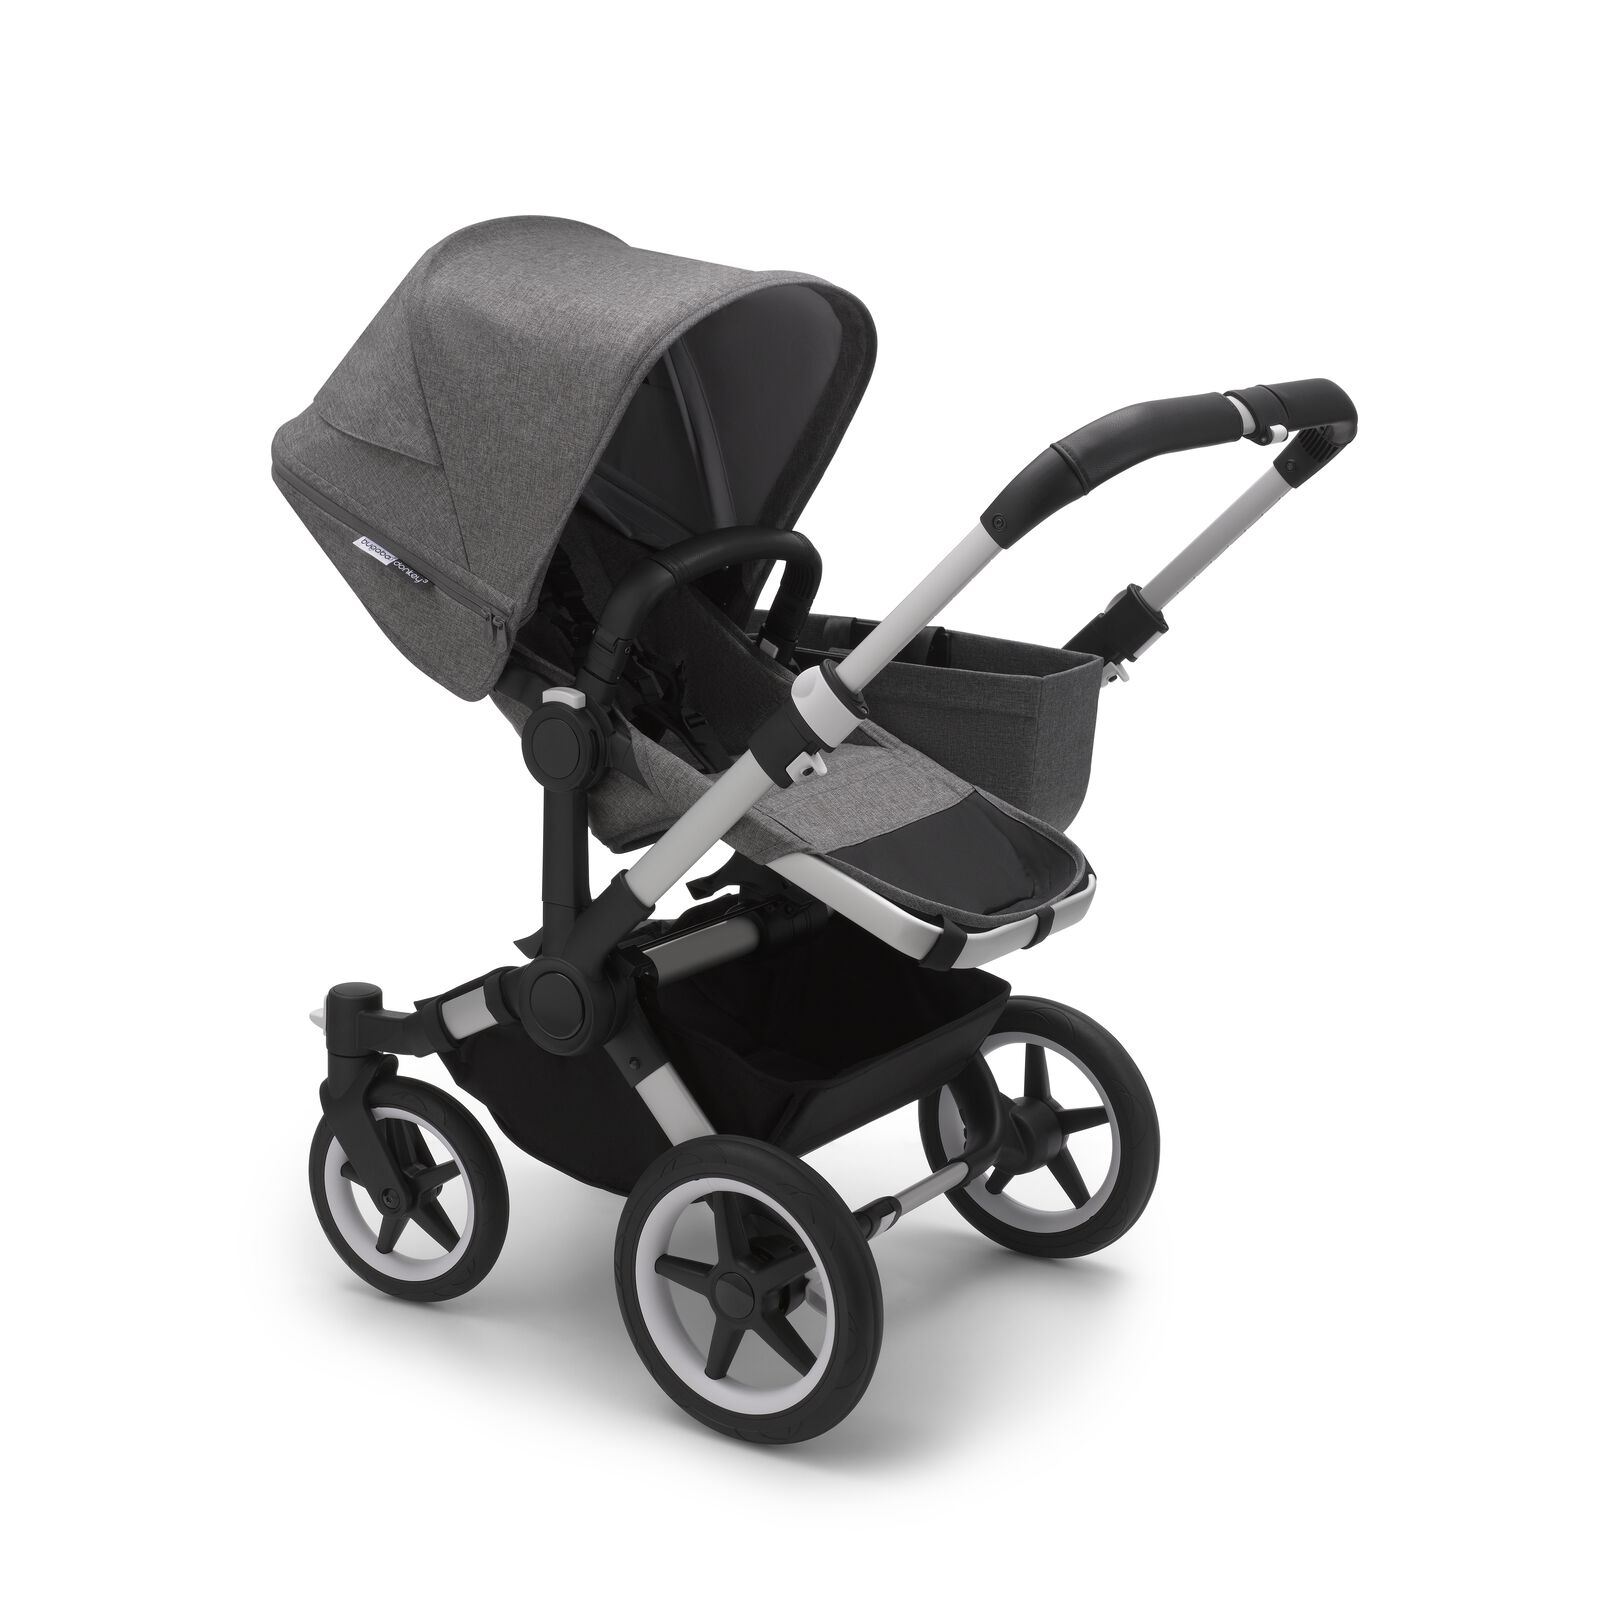 Bugaboo Donkey 3 mono bassinet and seat stroller - View 1